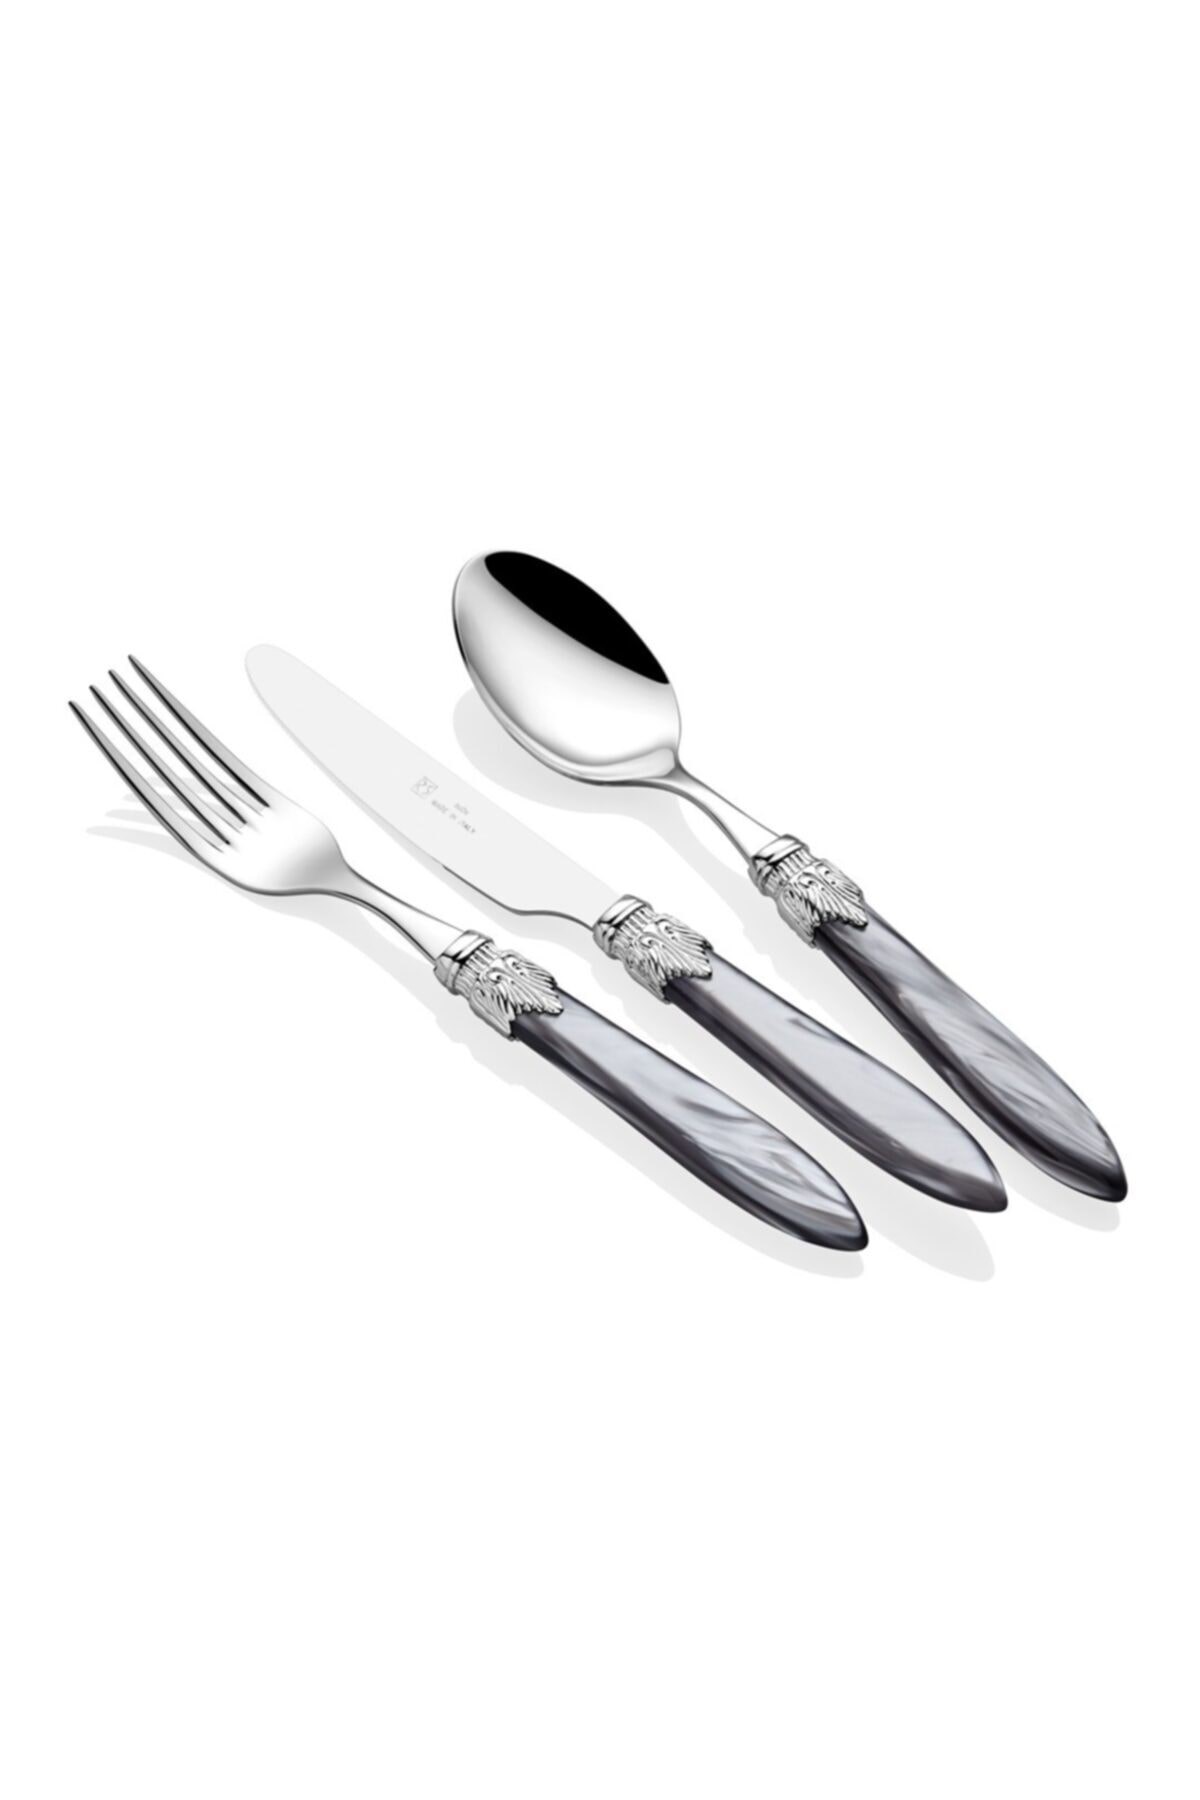 Laura Silver Gray 75 Pieces Fork Knife Set ICRS43CR75A10 